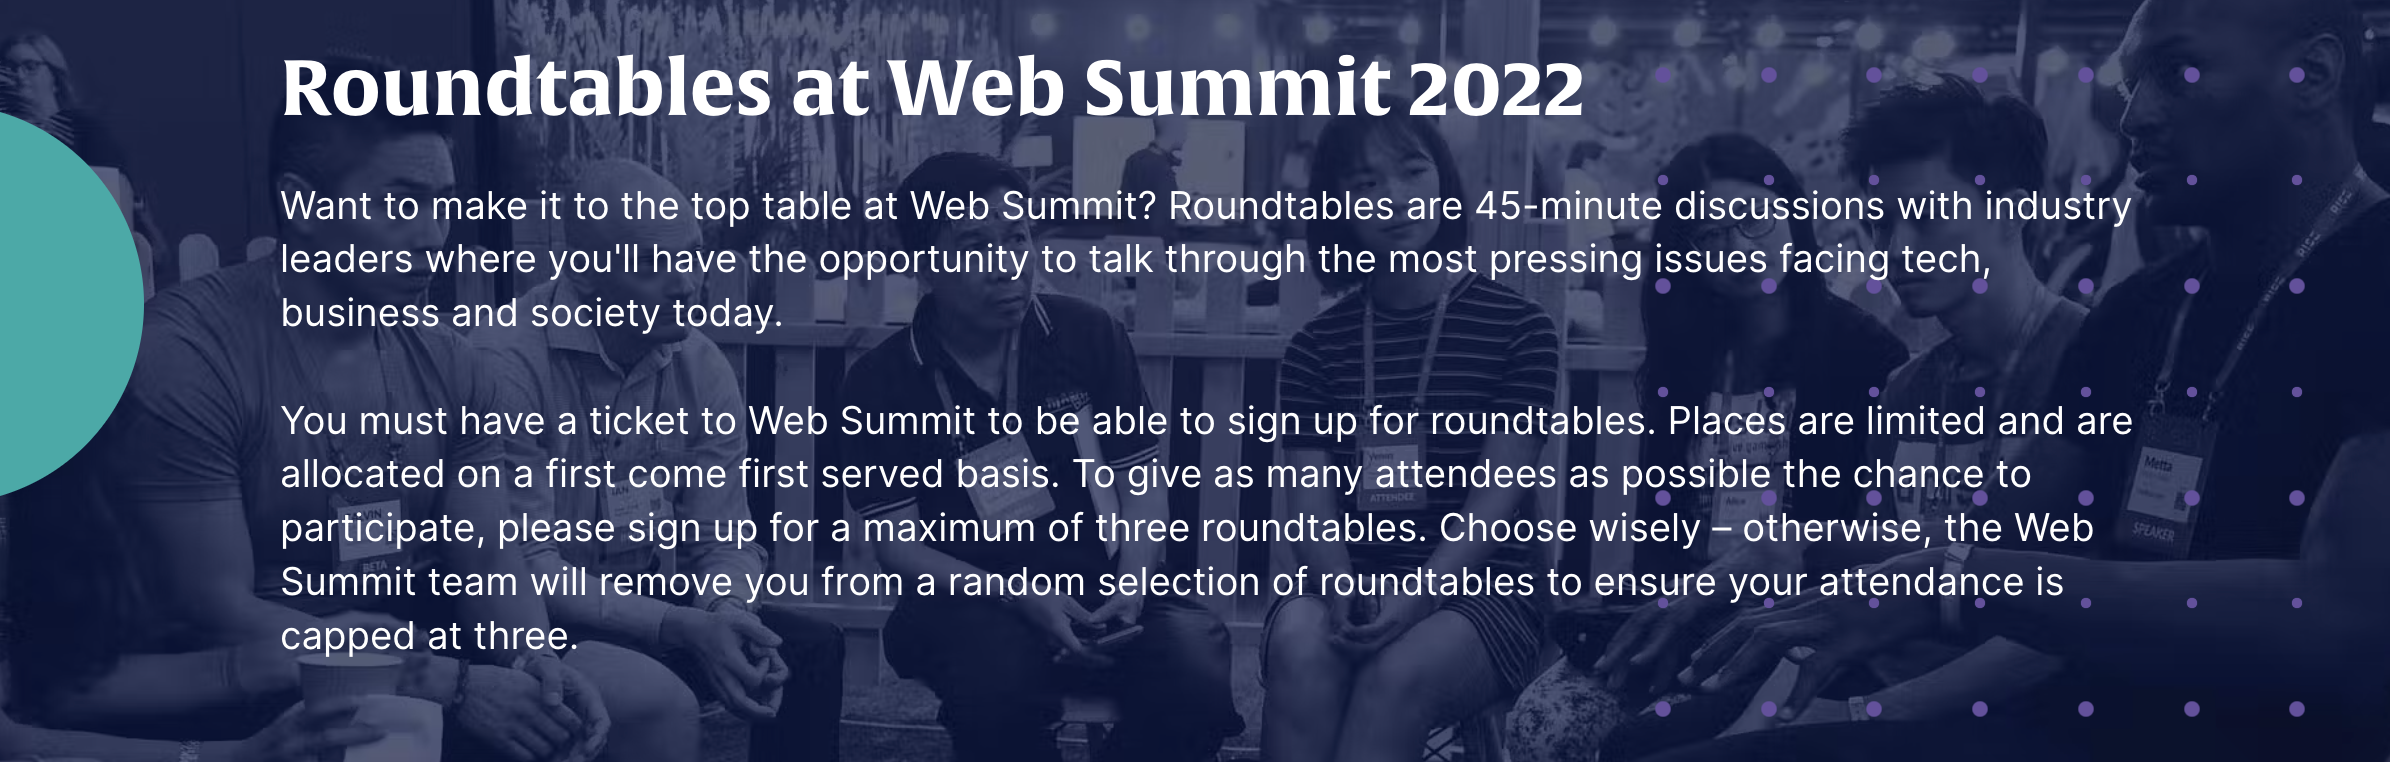 Screenshot of the Web Summit's exclusive roundtable program 